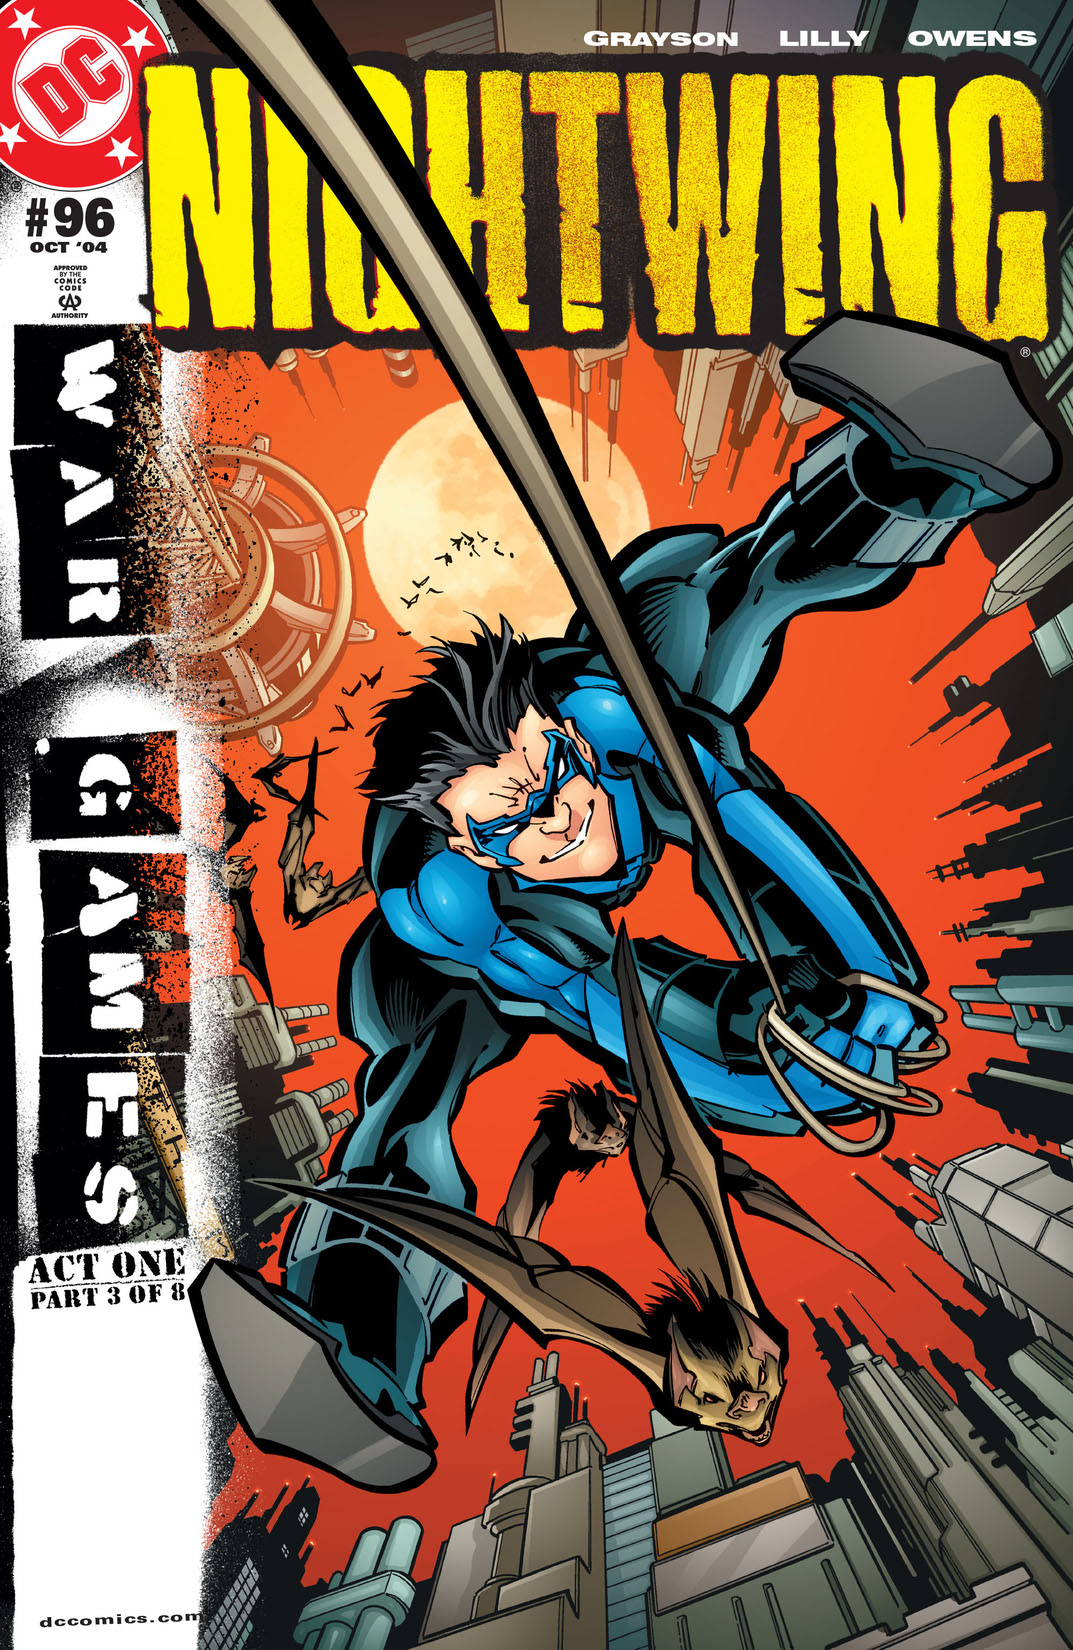 Nightwing (1996-) #96 preview images